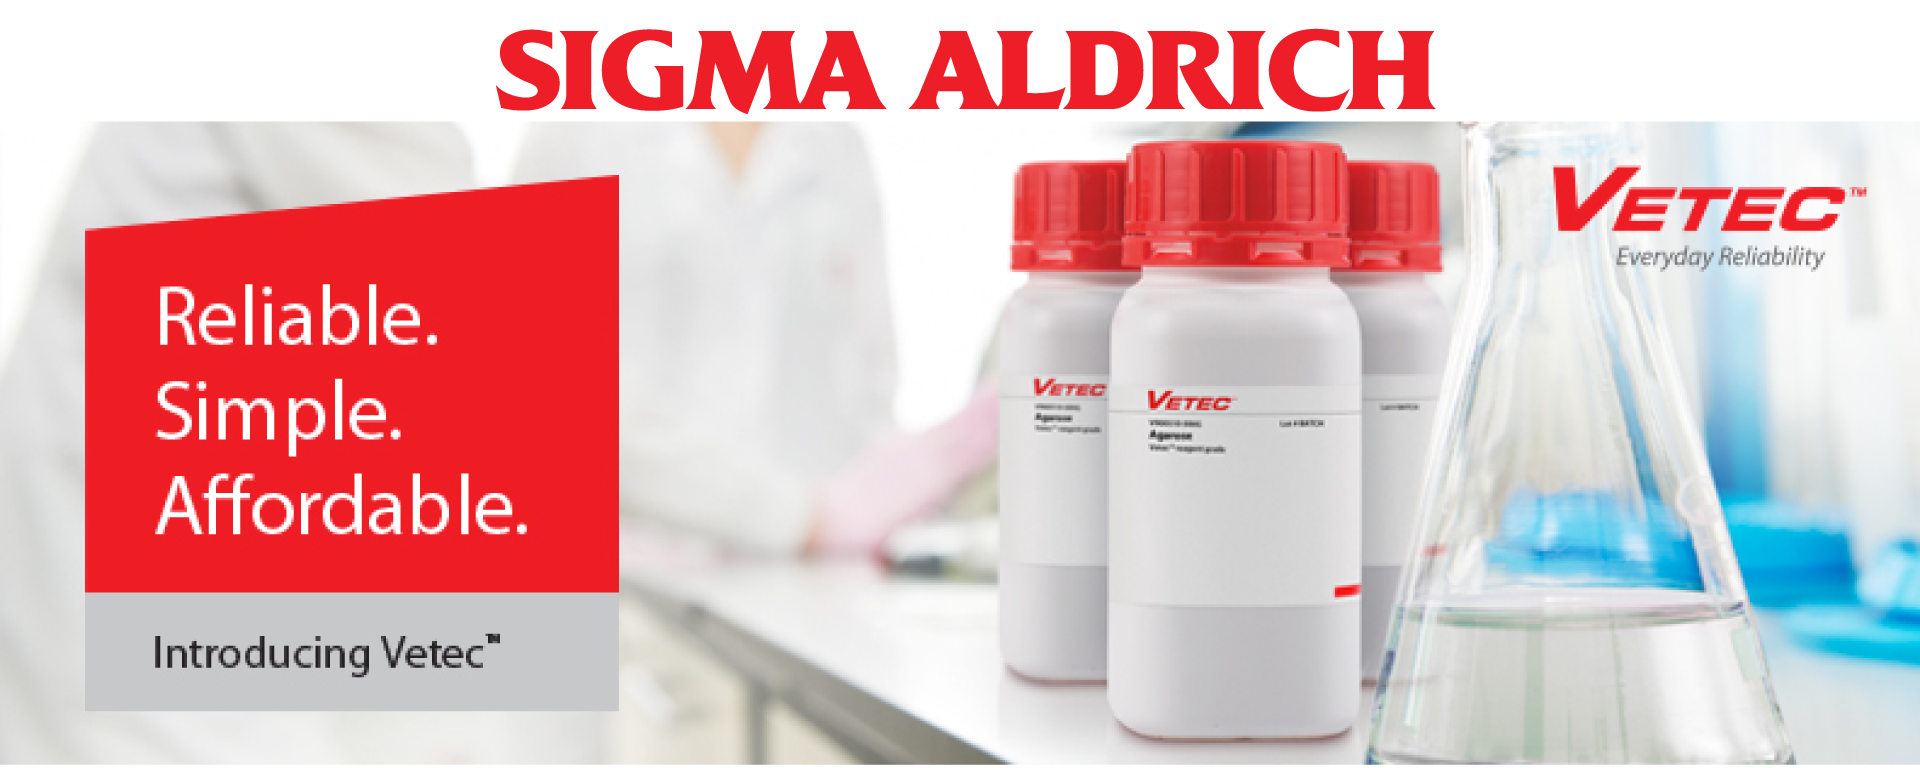 hoa-chat-sigma-aldrich-banner.png